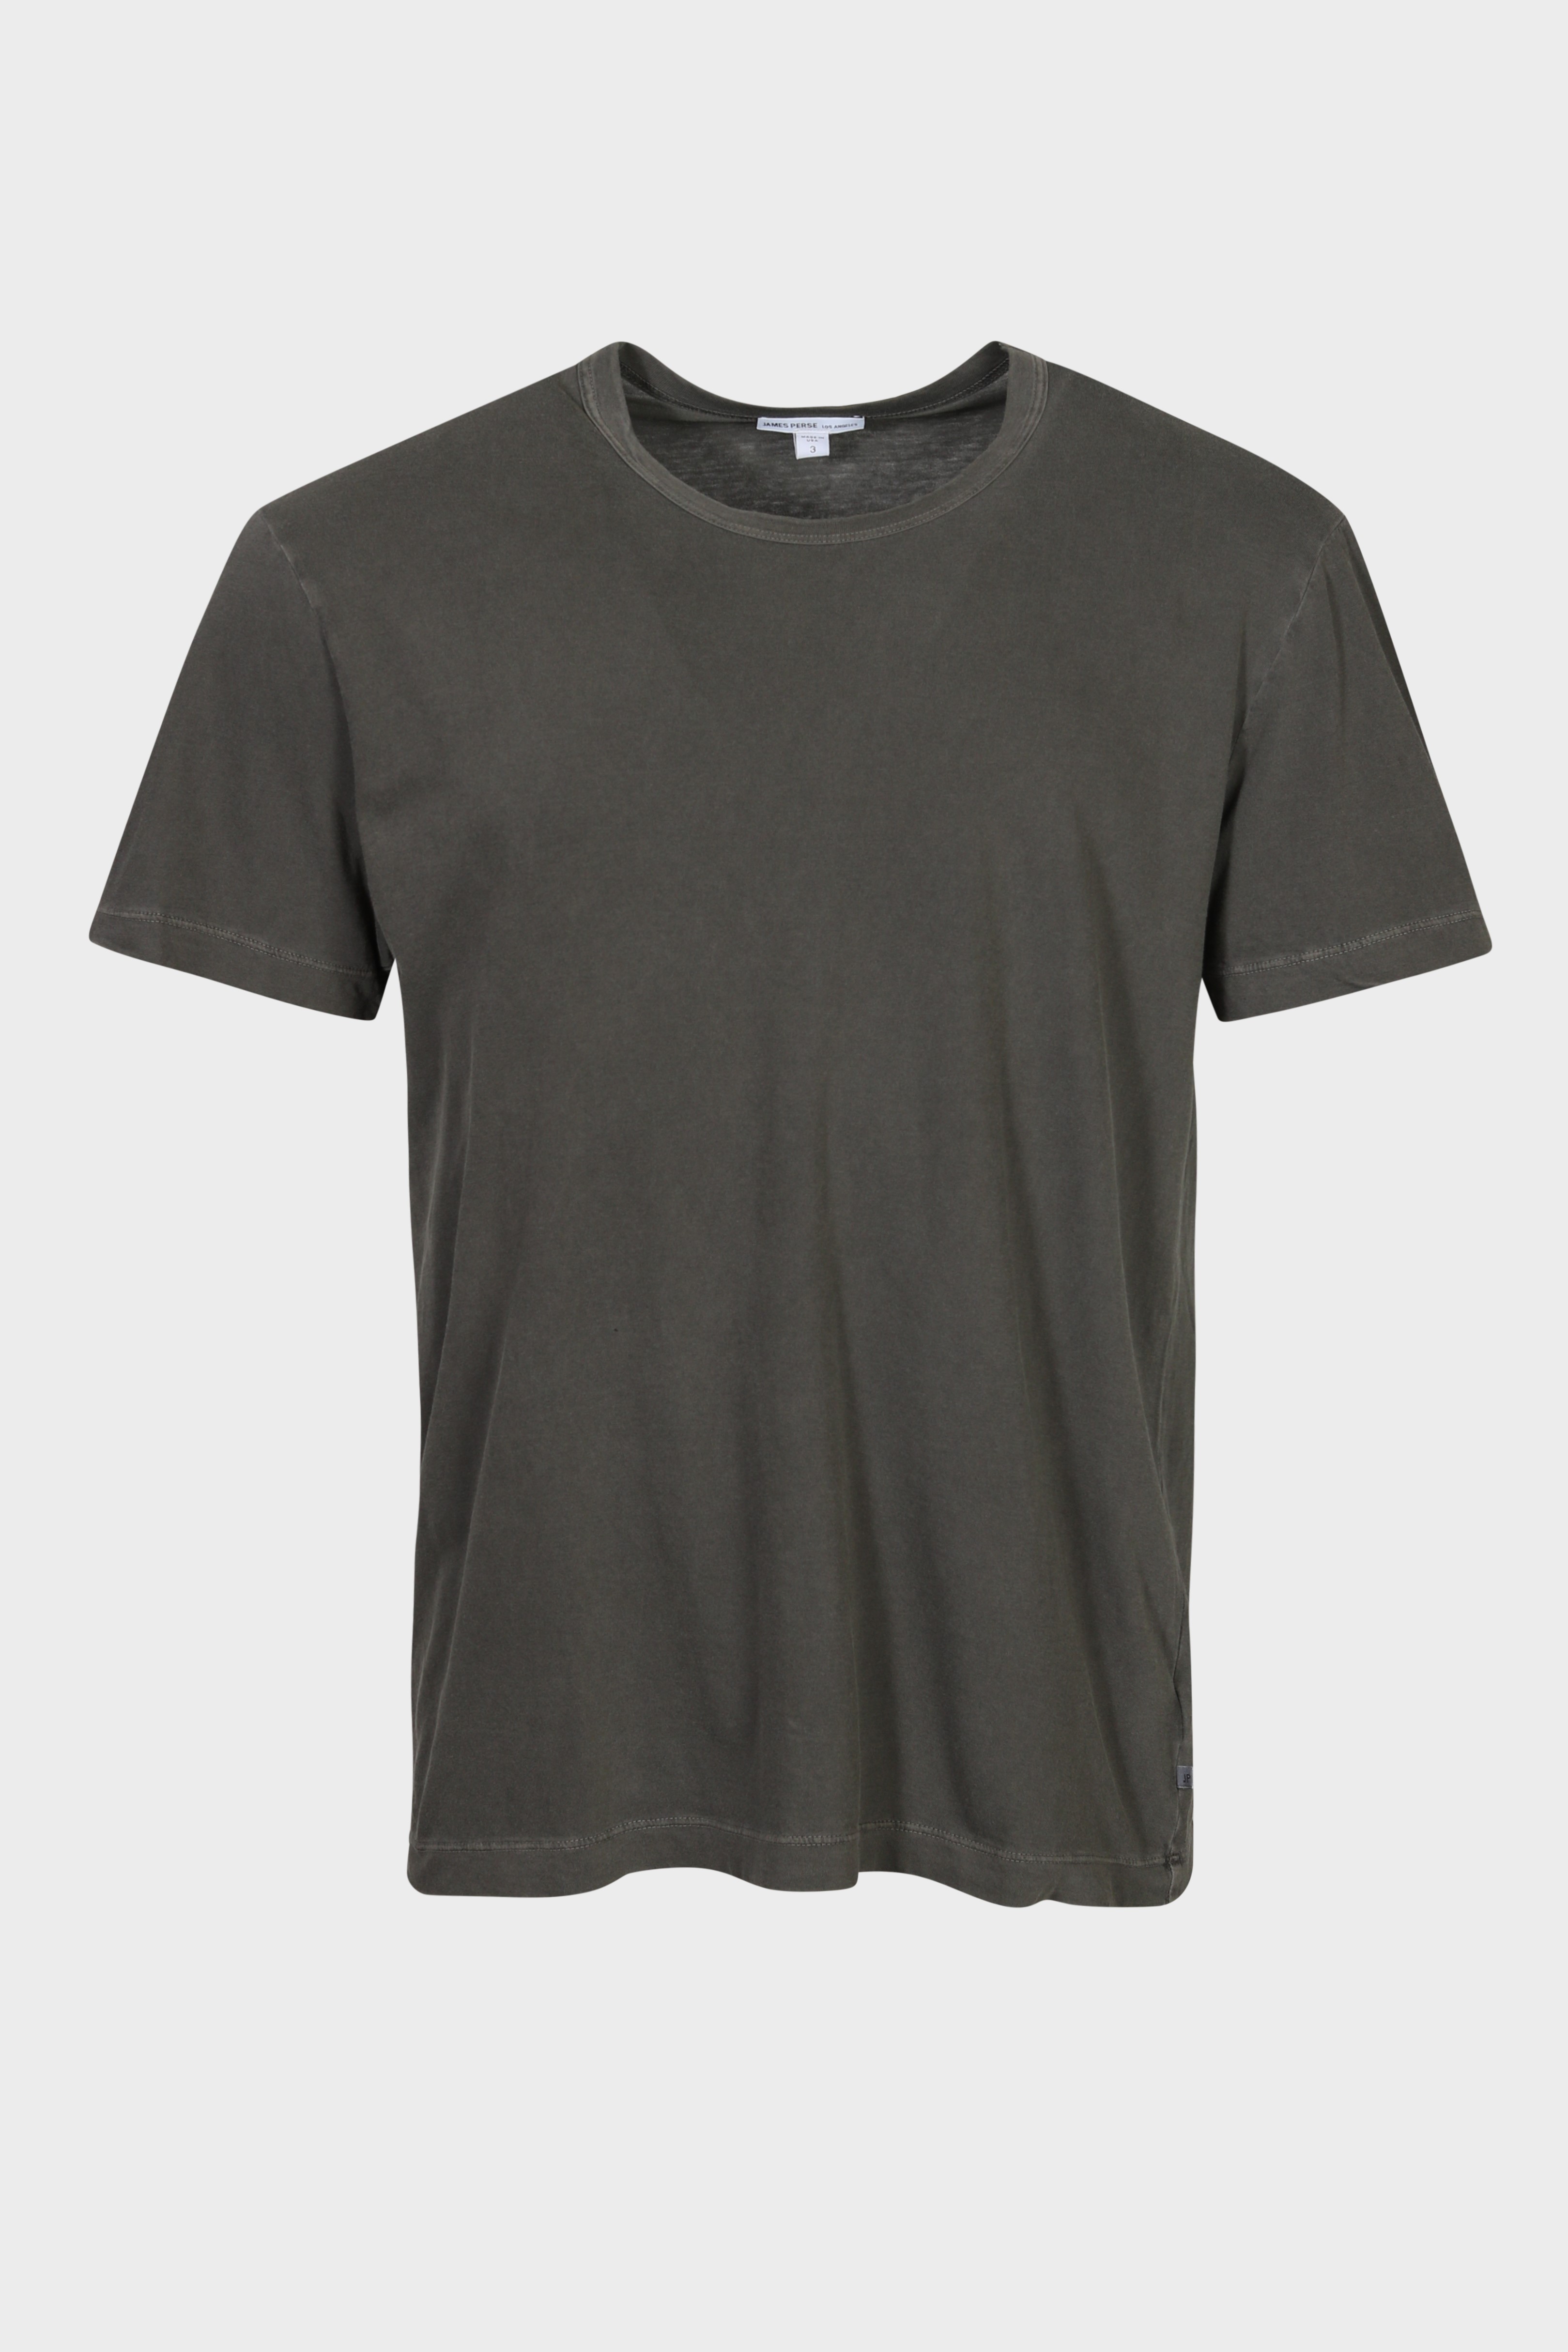 JAMES PERSE Crewneck T-Shirt in Washed Olive